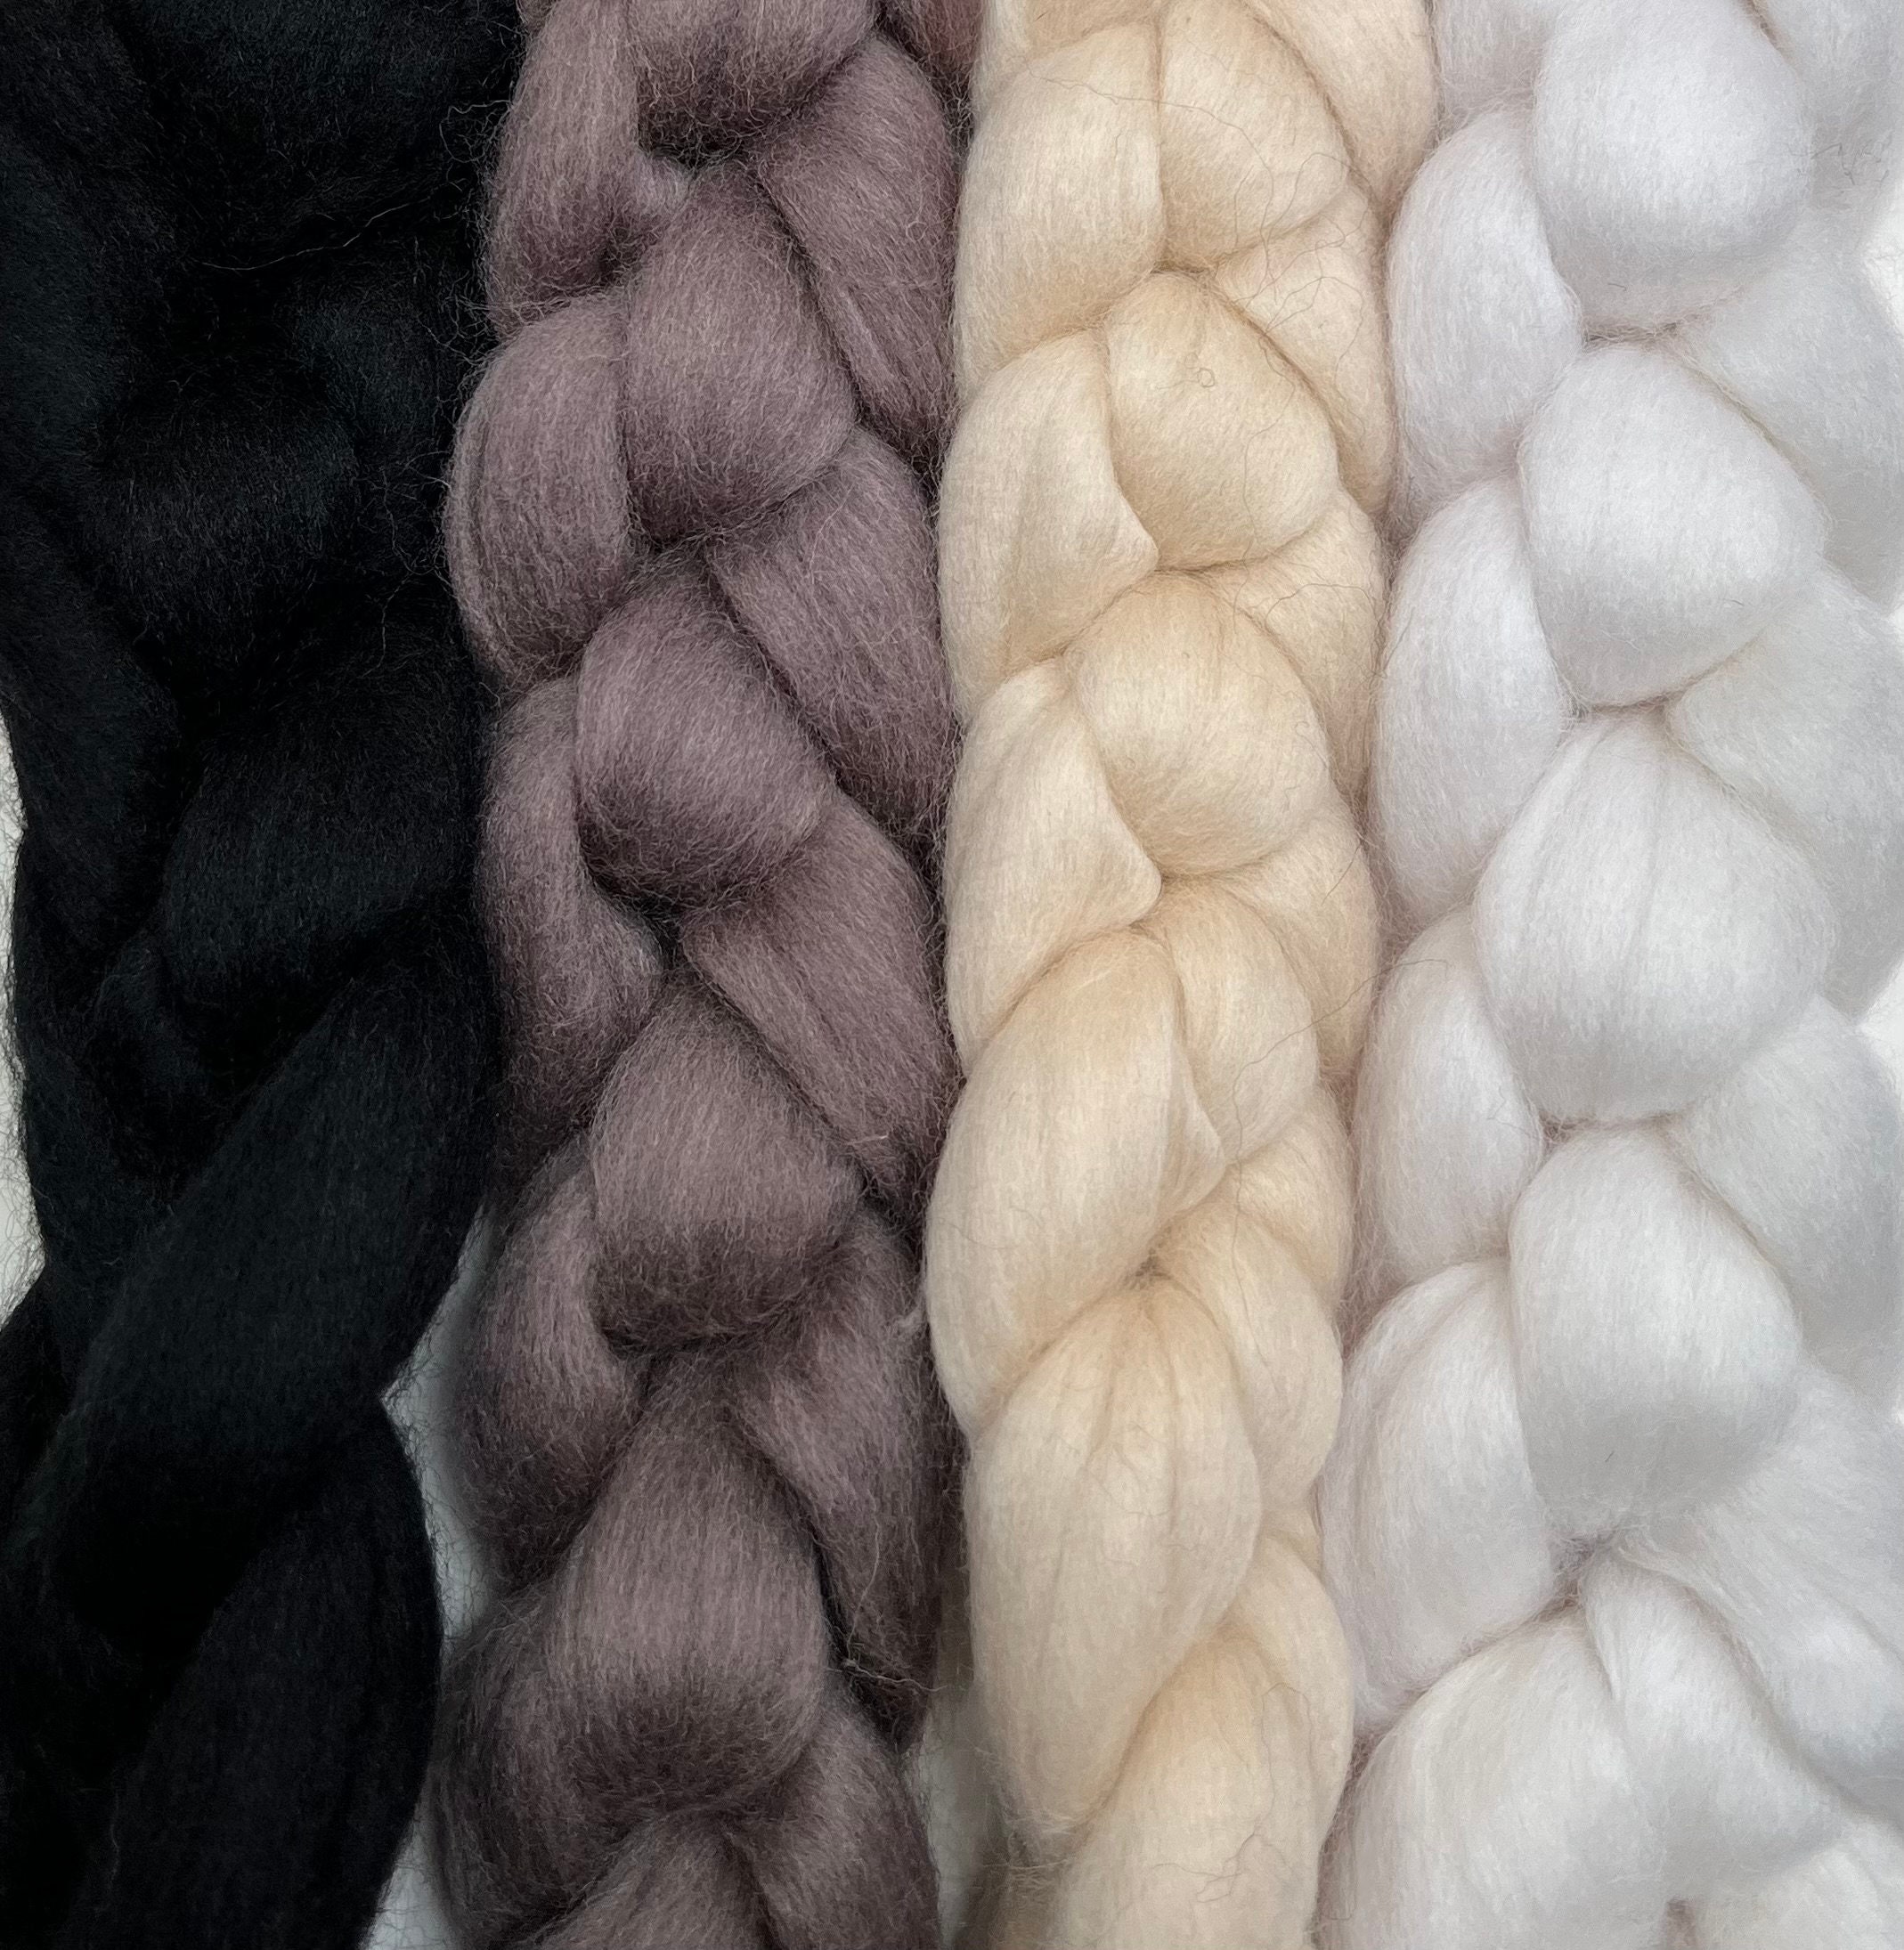 Corriedale Roving & White Natural Core Wool for Needle Felting, Spinning,  Blending. Carded Wool for Fiber Art, Assorted Color Variety Pack 